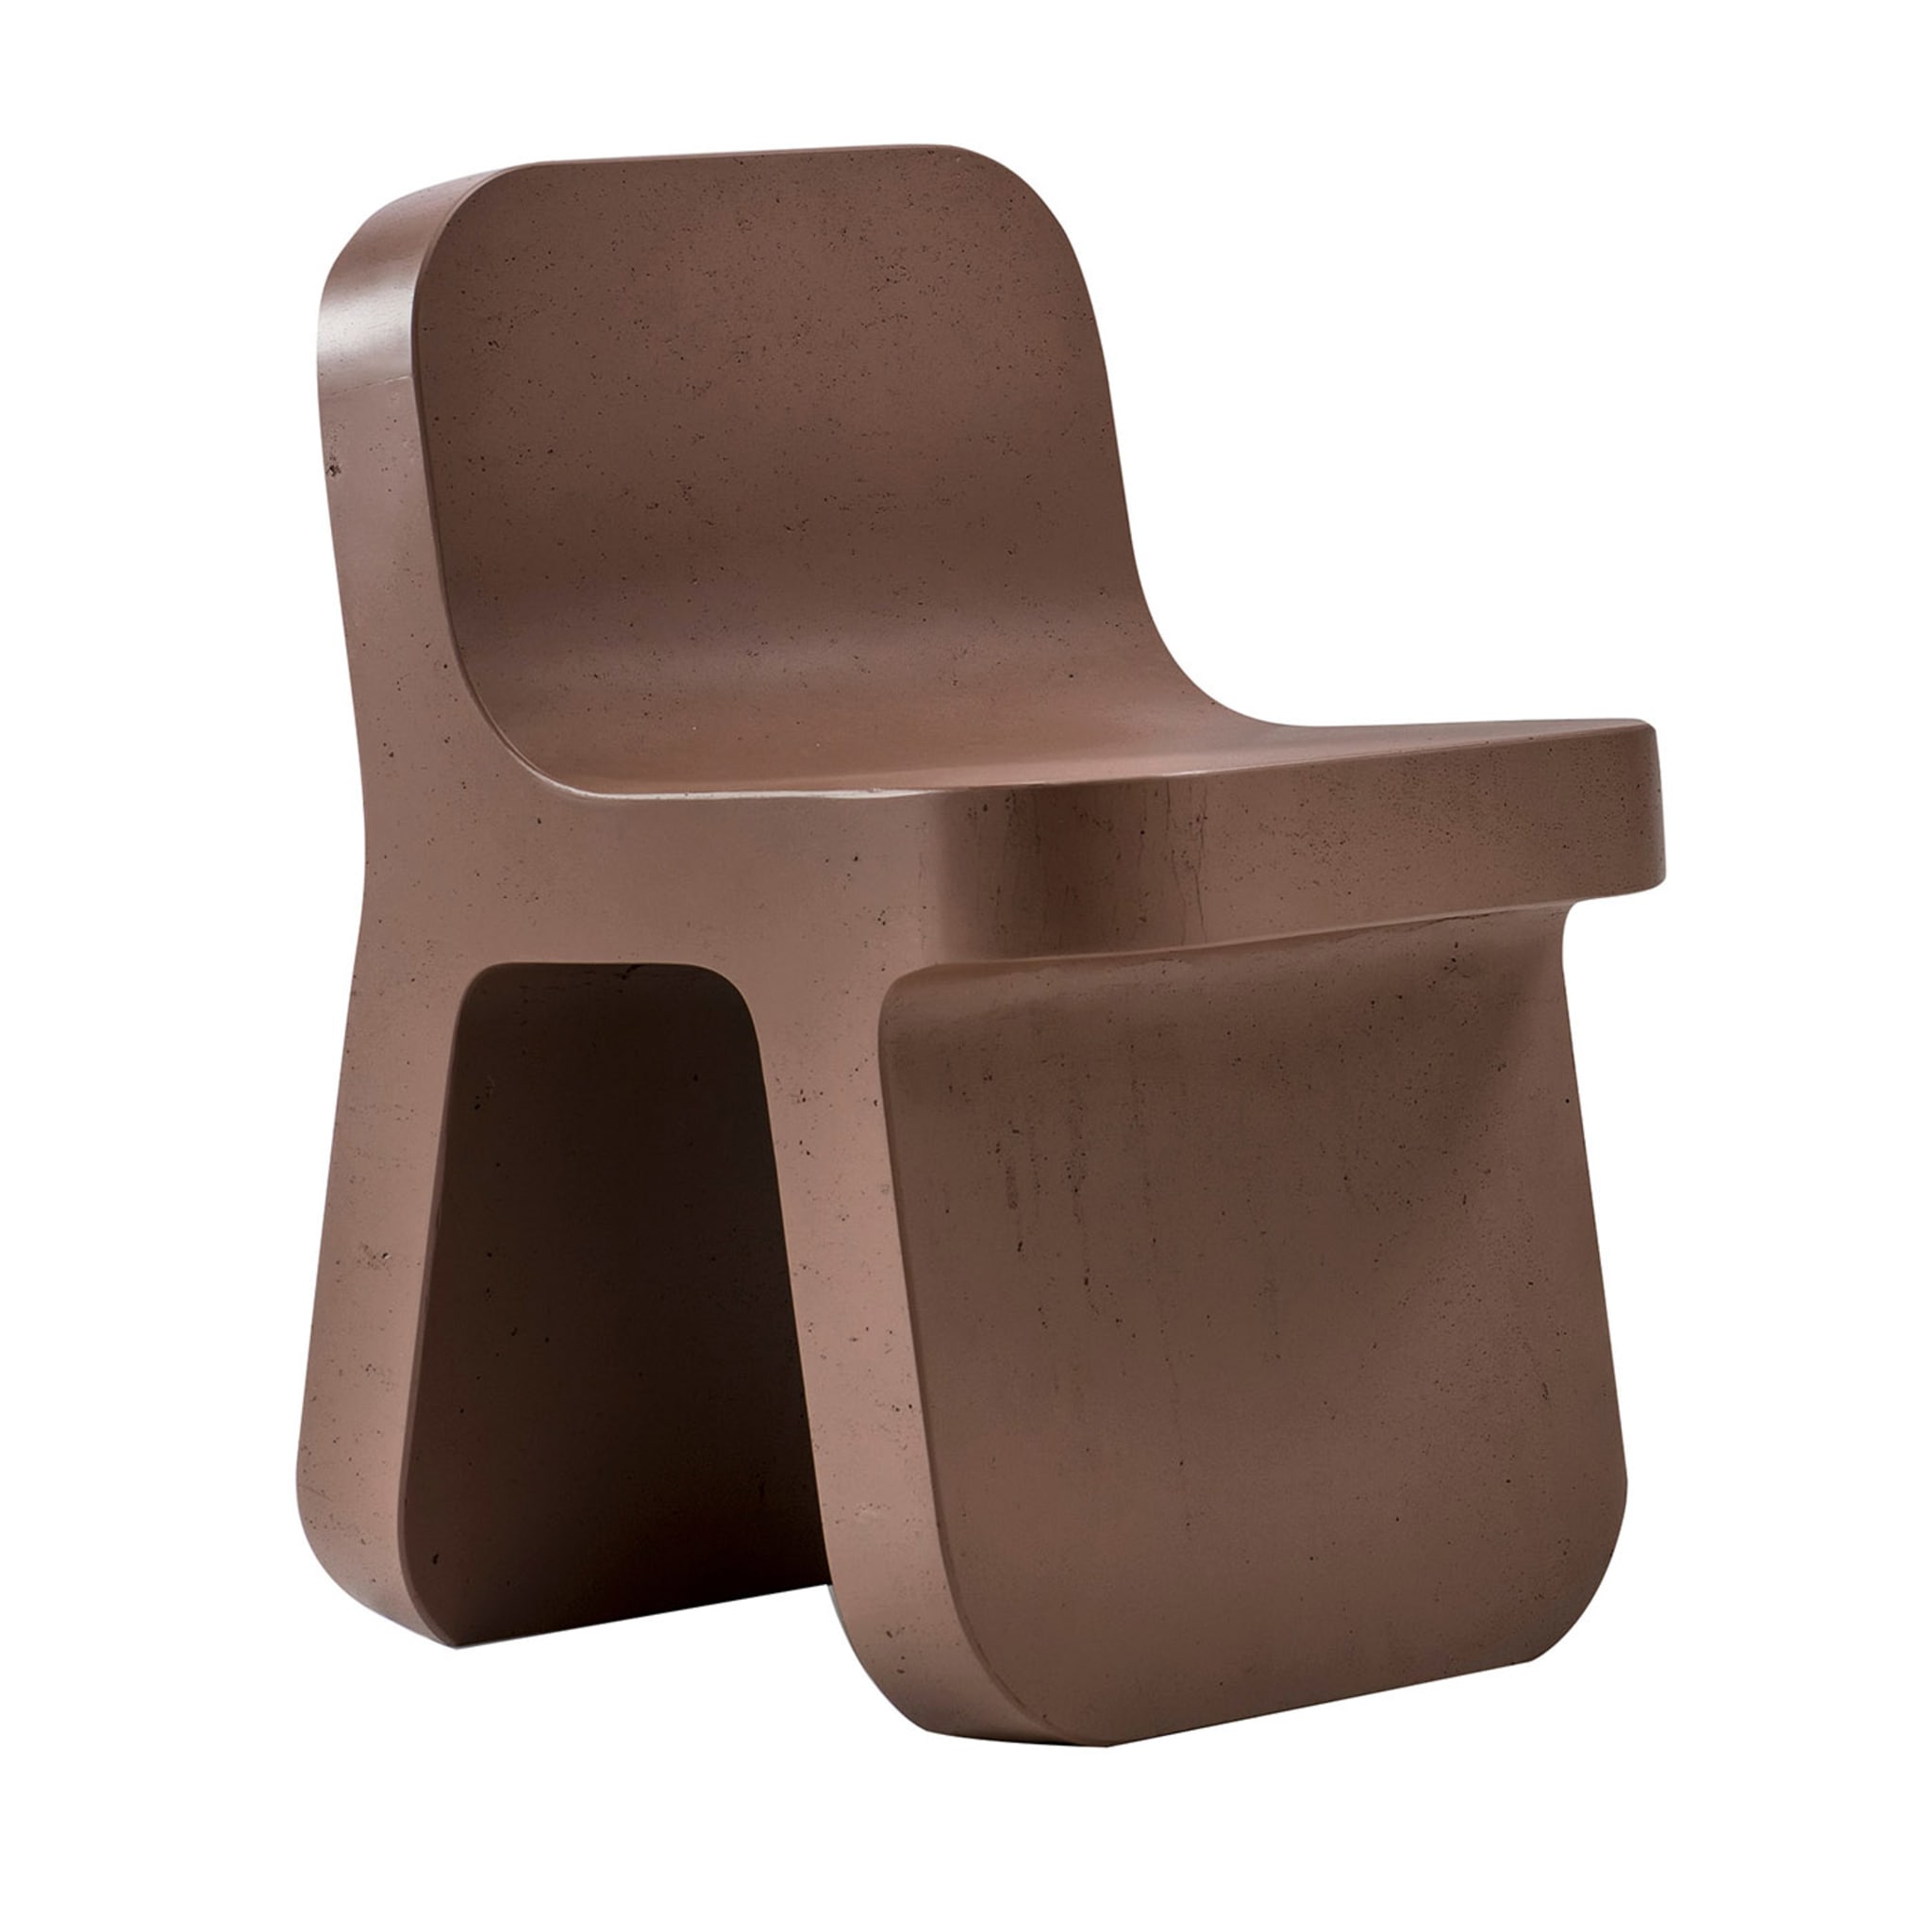 Torcello Chair by Defne Koz and Marco Susani - Main view